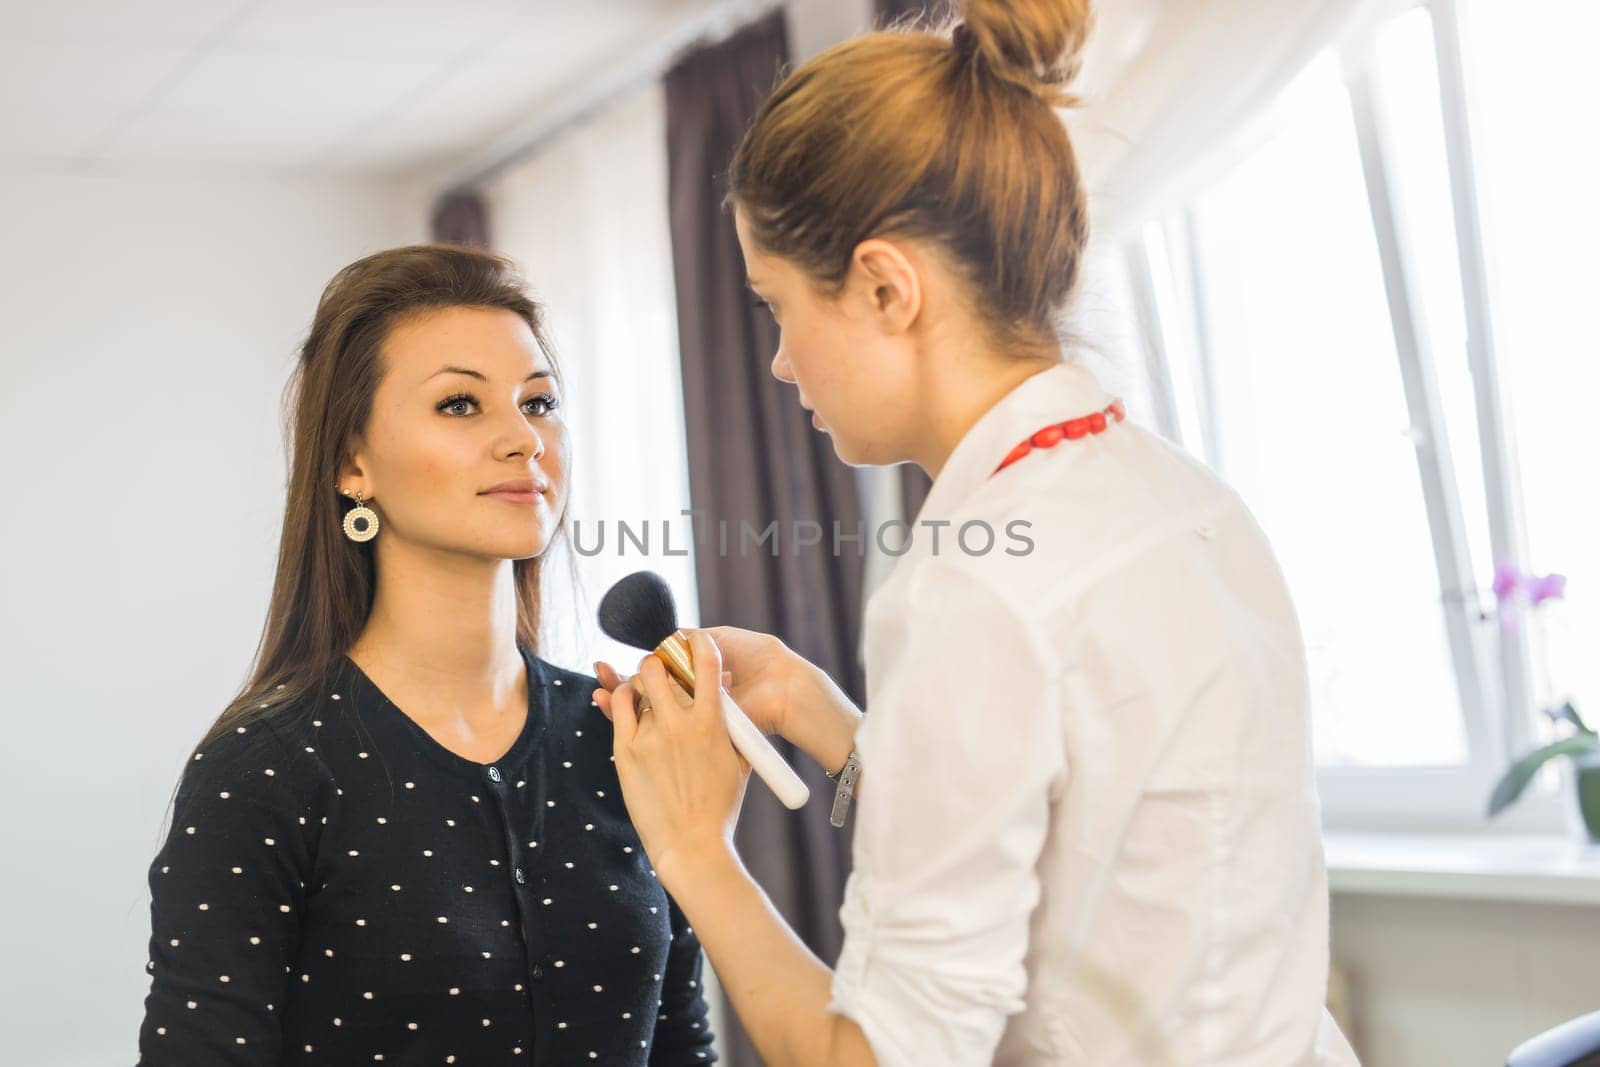 Makeup artist doing make-up for young beautiful woman by Satura86